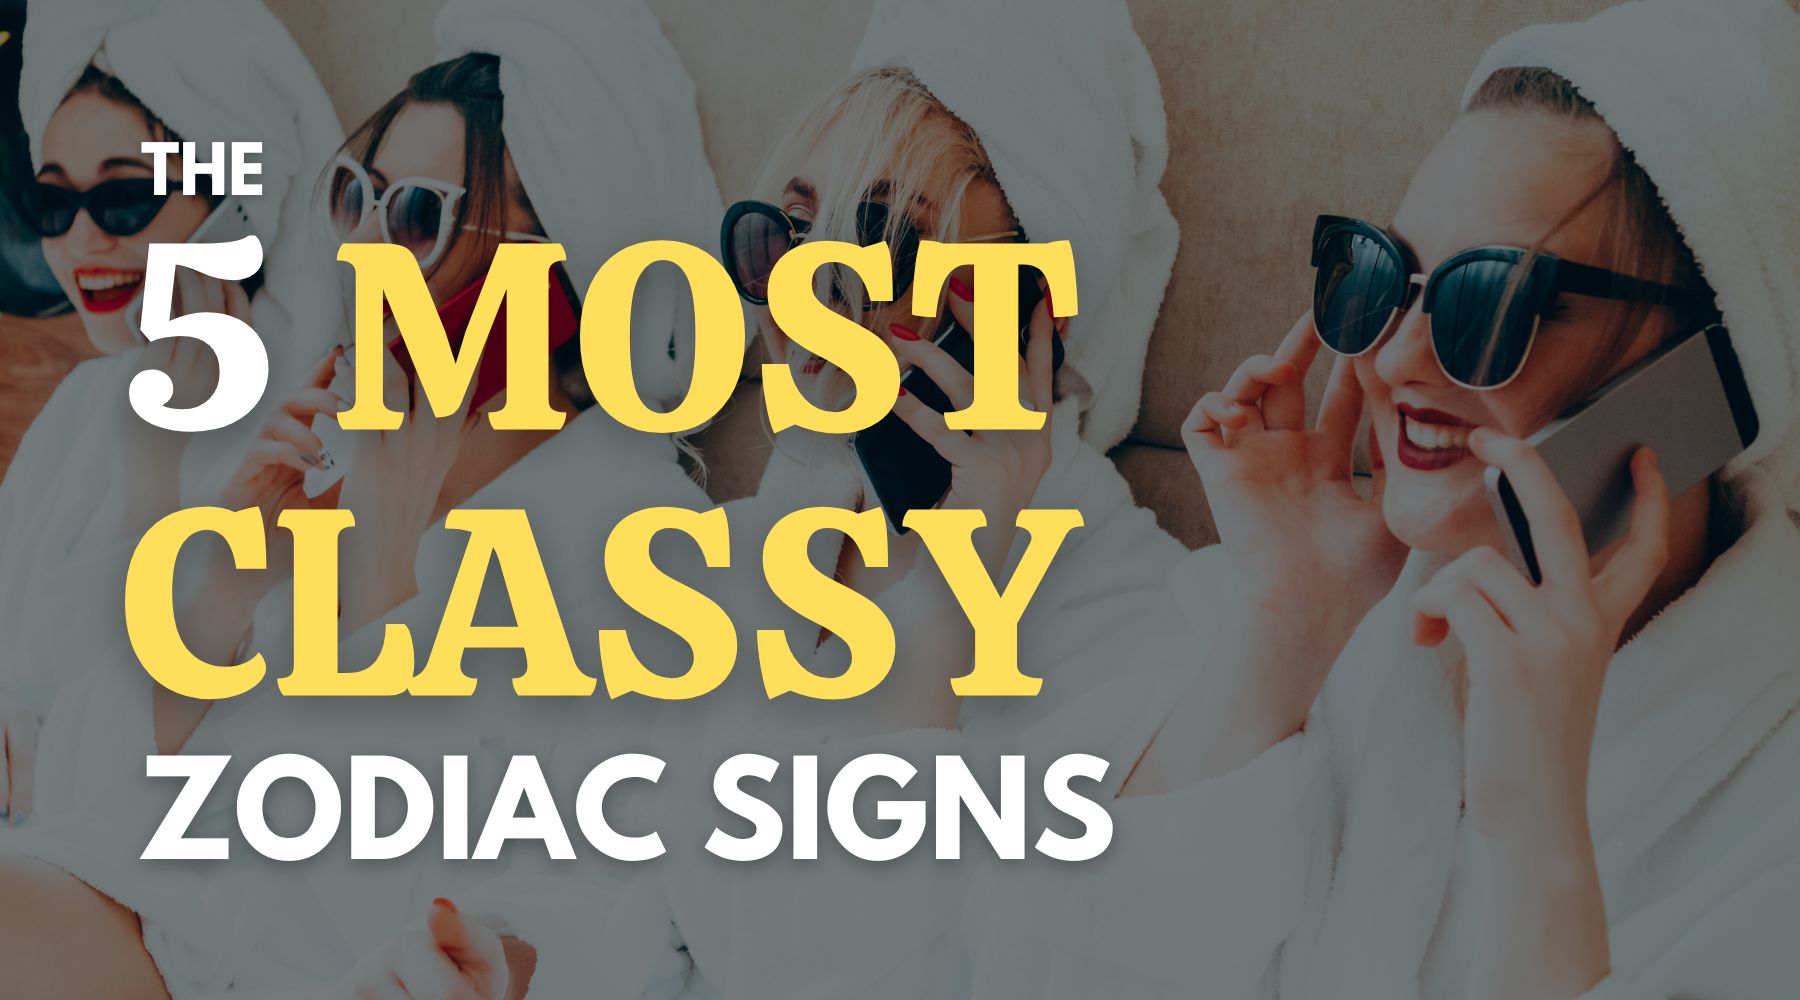 The 5 most classy zodiac signs, and what makes them so sophisticated